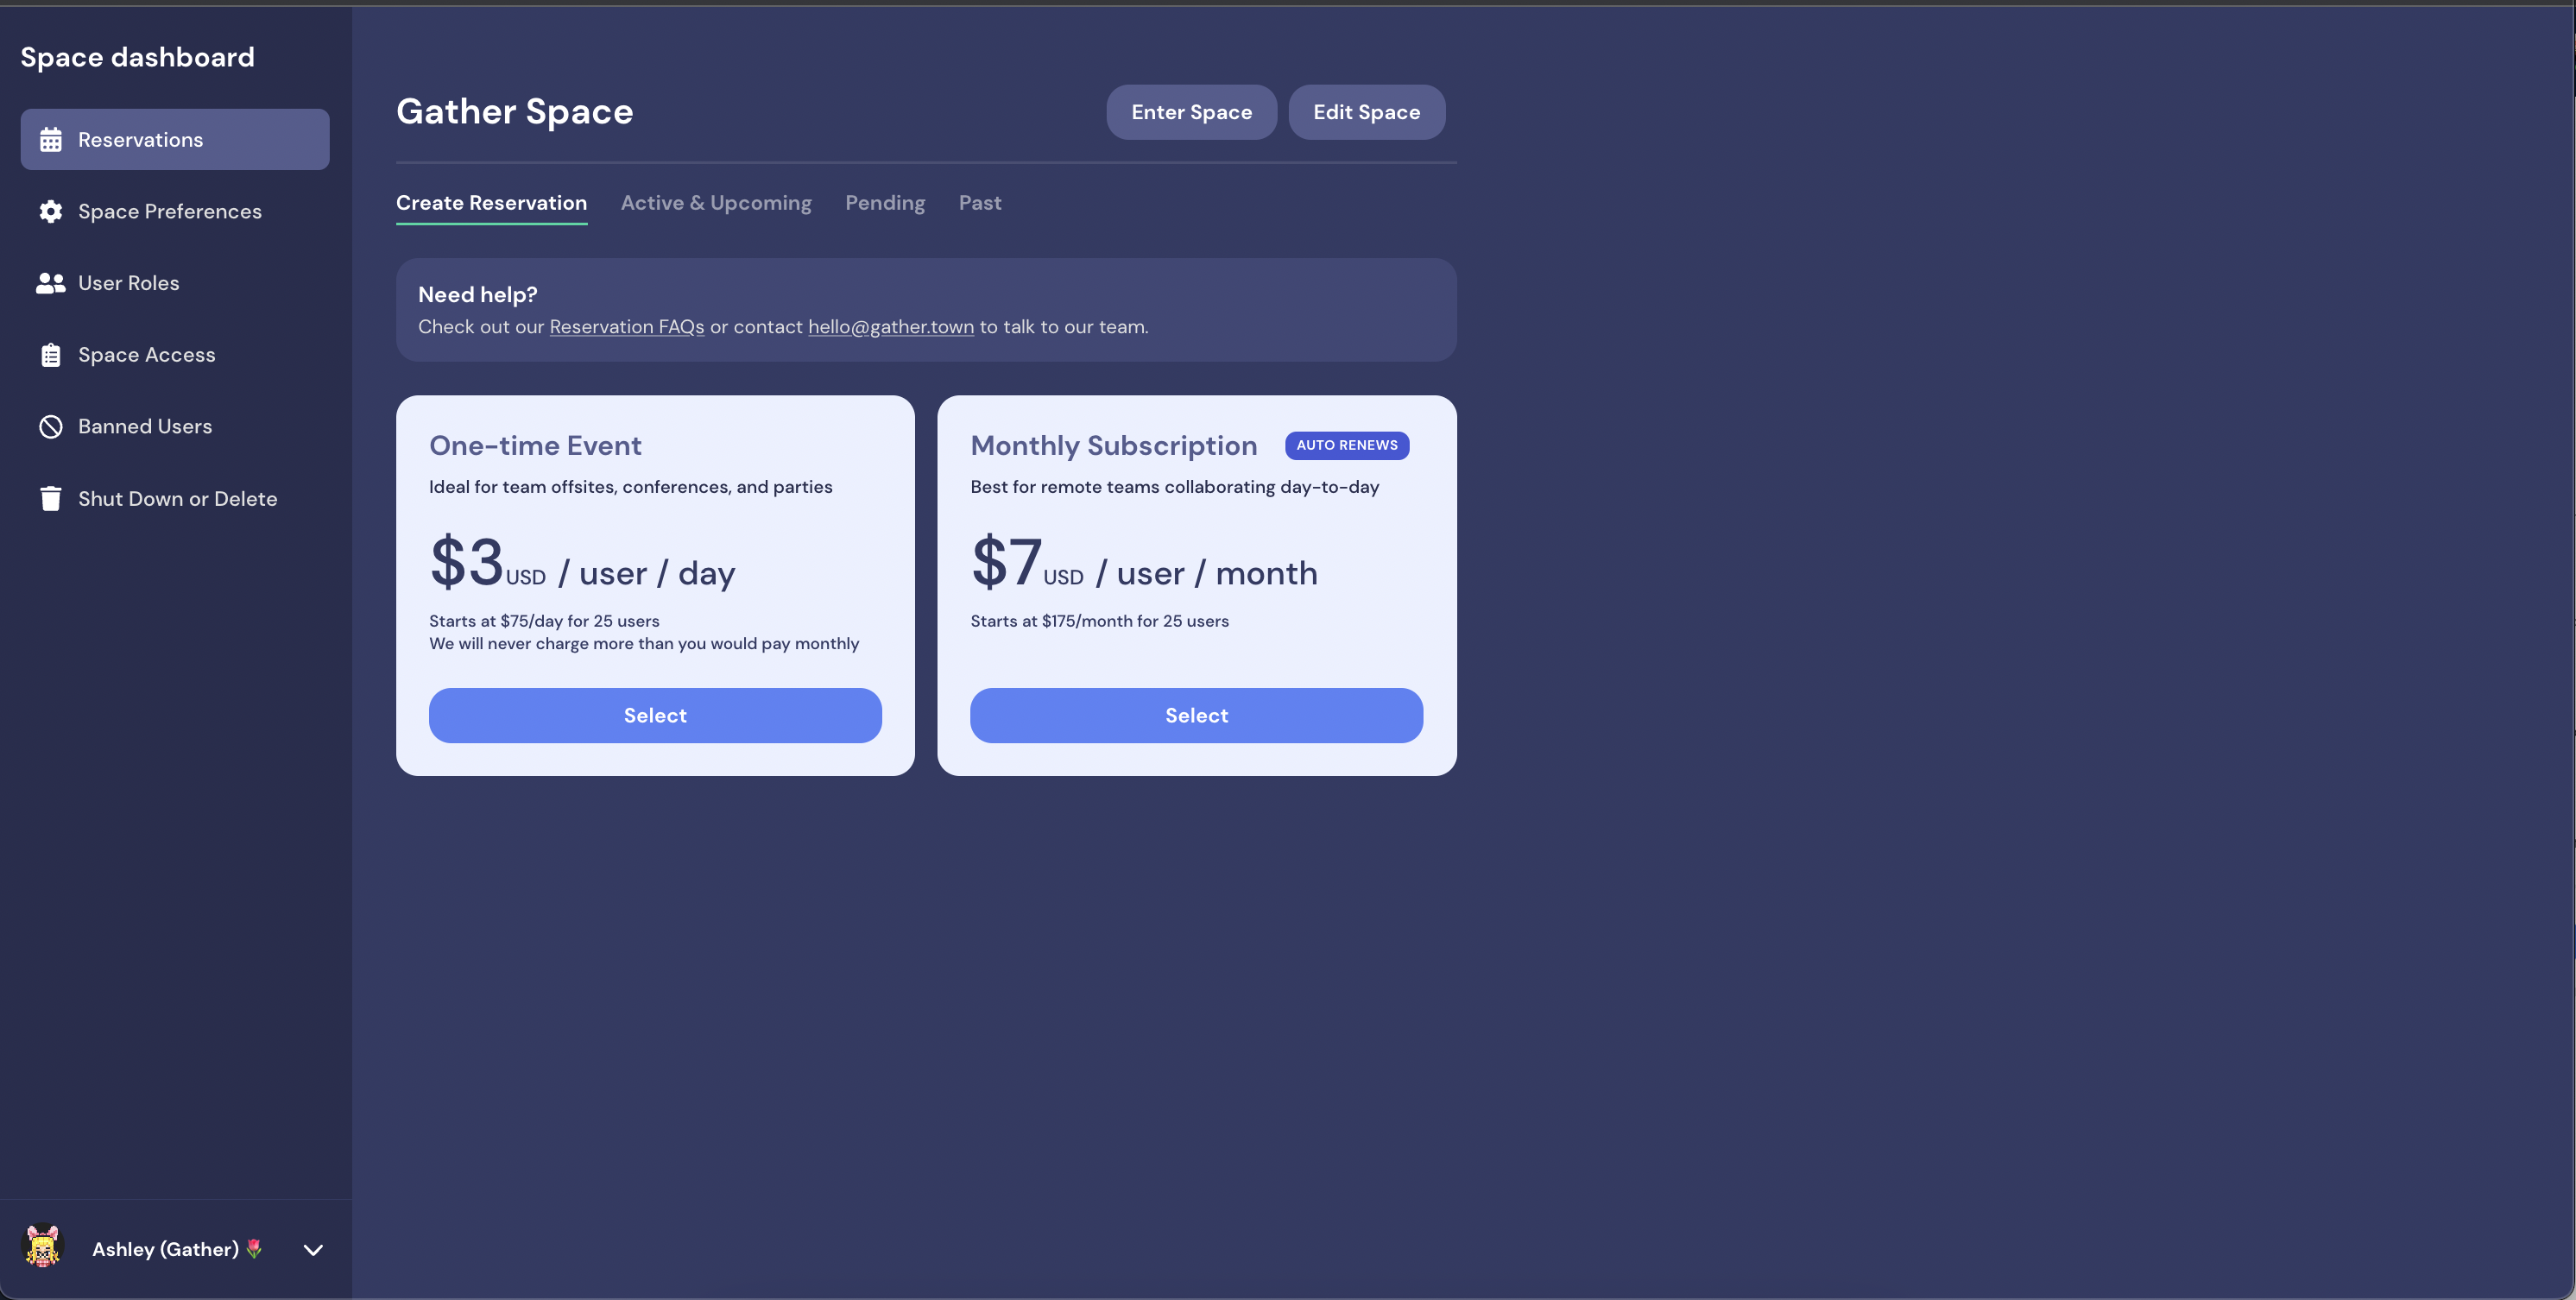 A view of the Reservations section of the dashboard, with the three cards showing our plans and their cost.